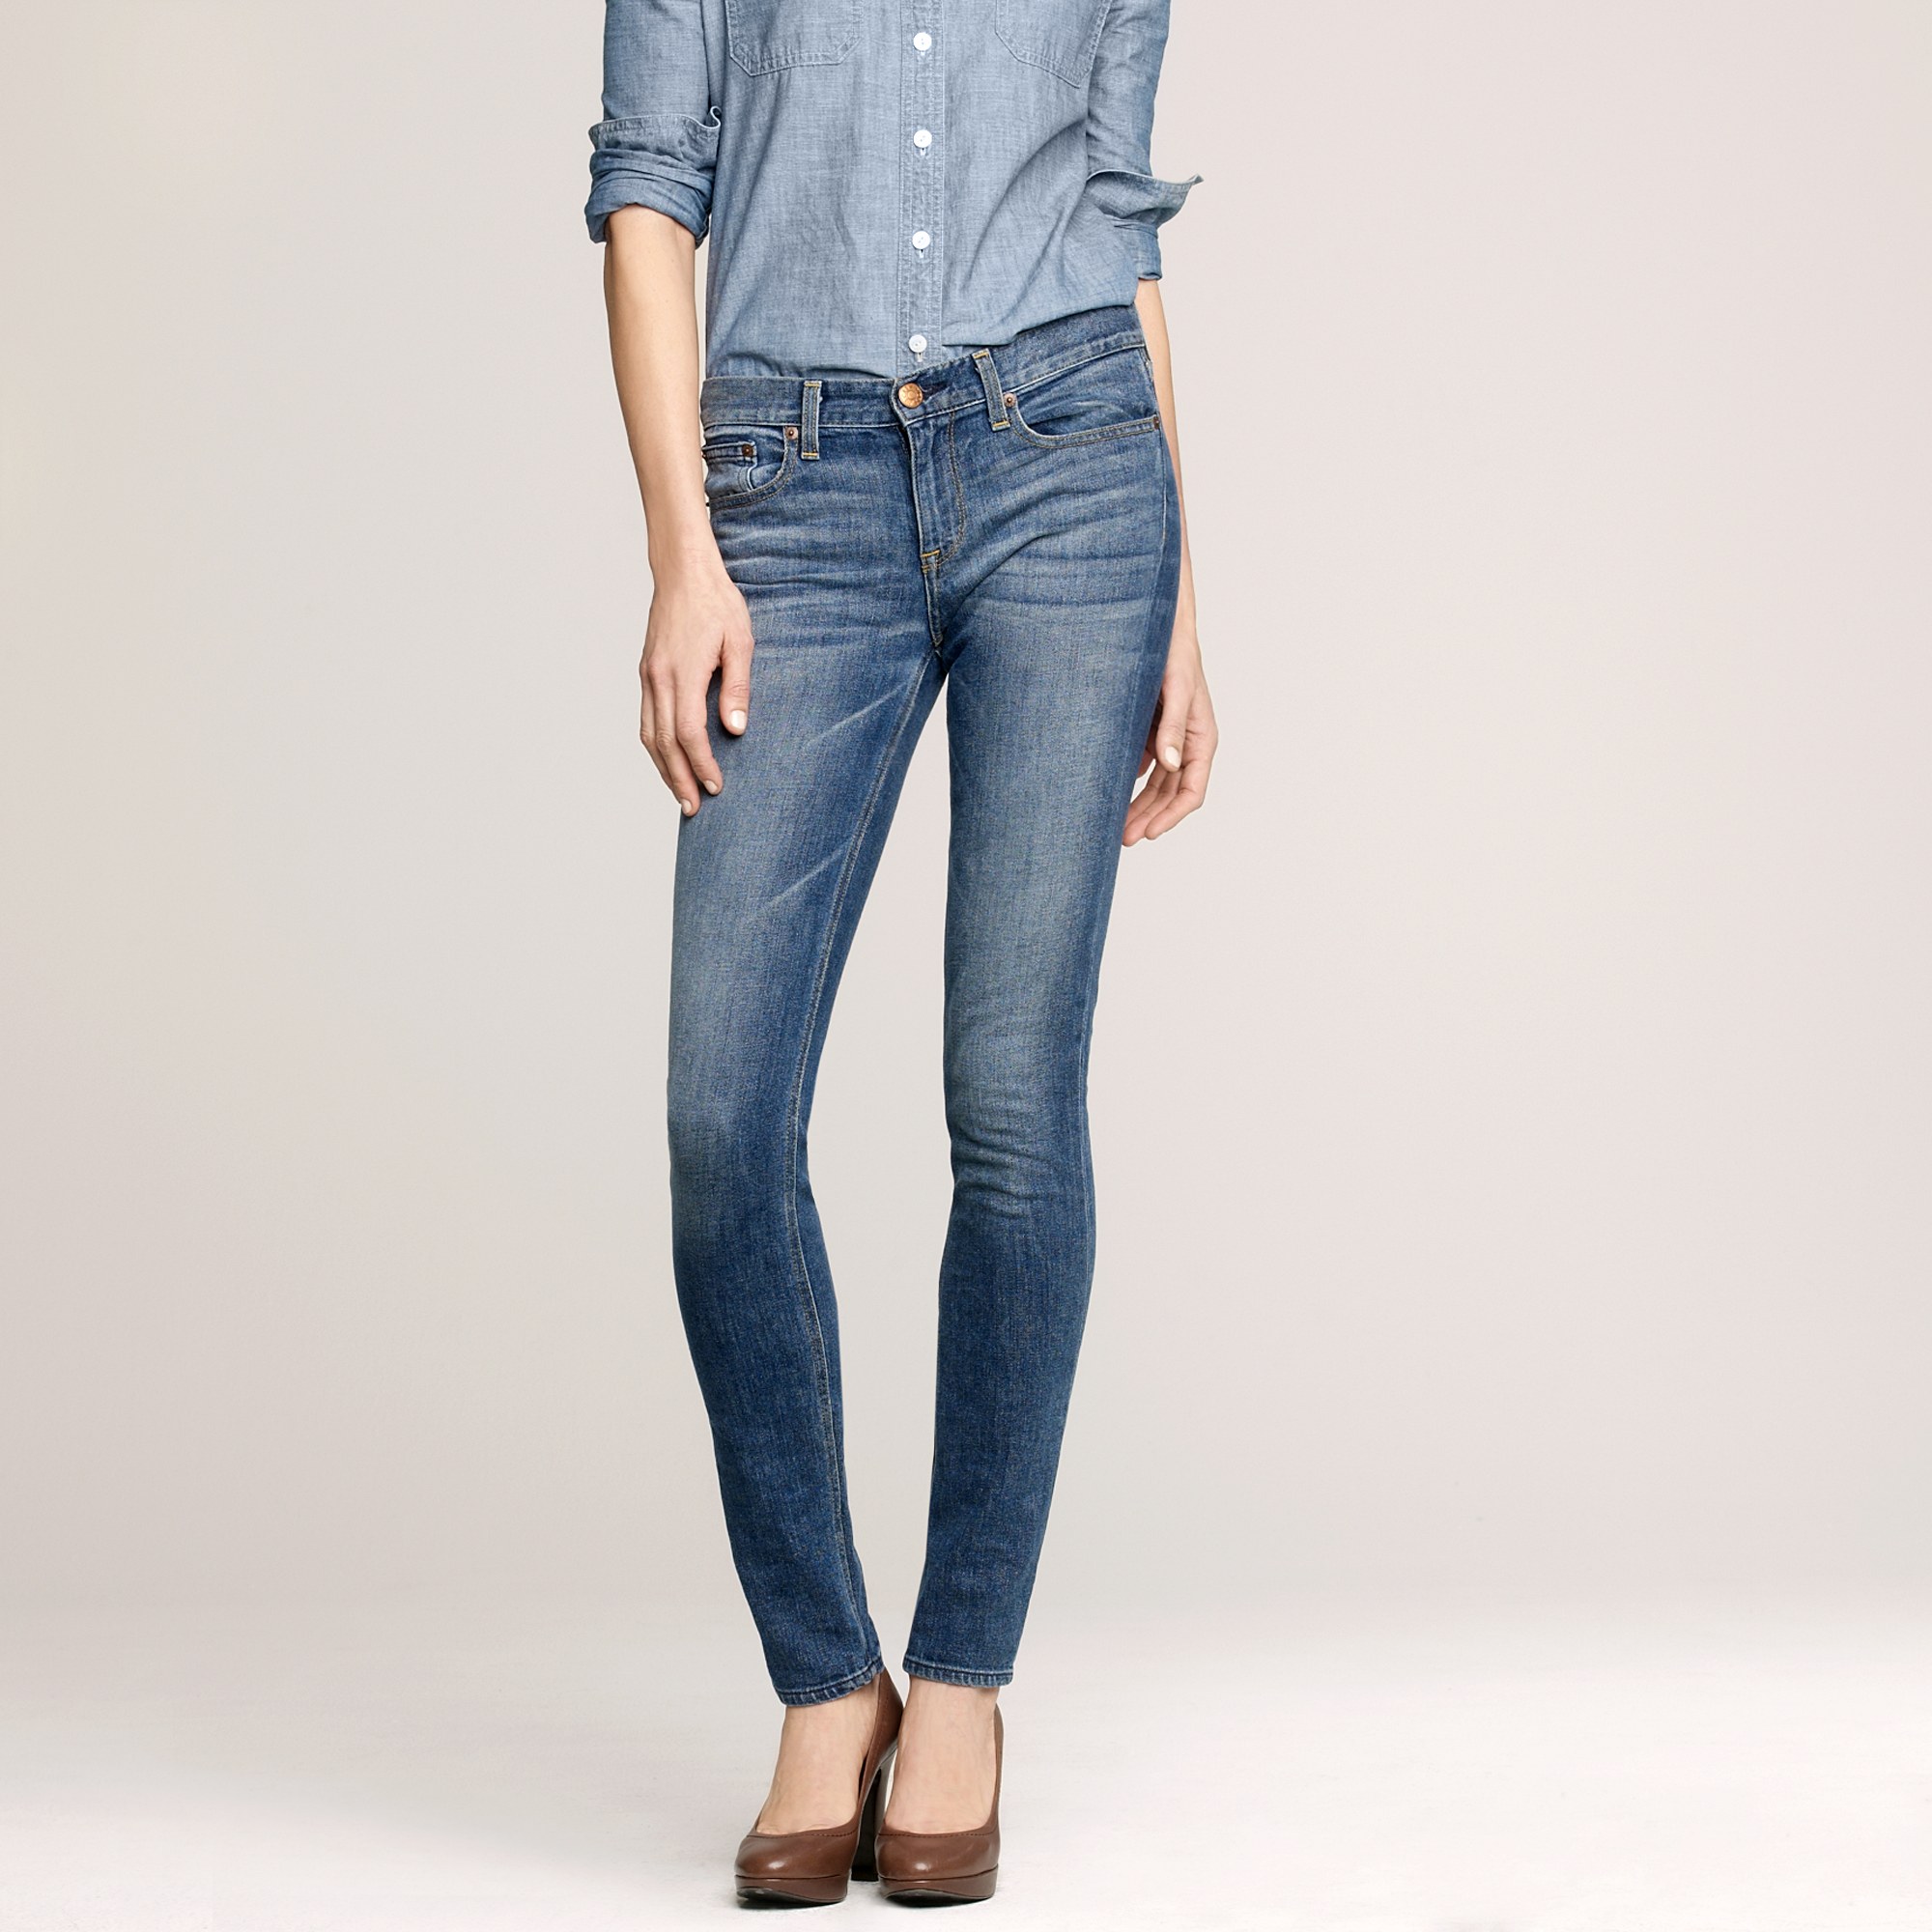 J.Crew Downtown Skinny Jean in Pearly Blue Wash | Lyst